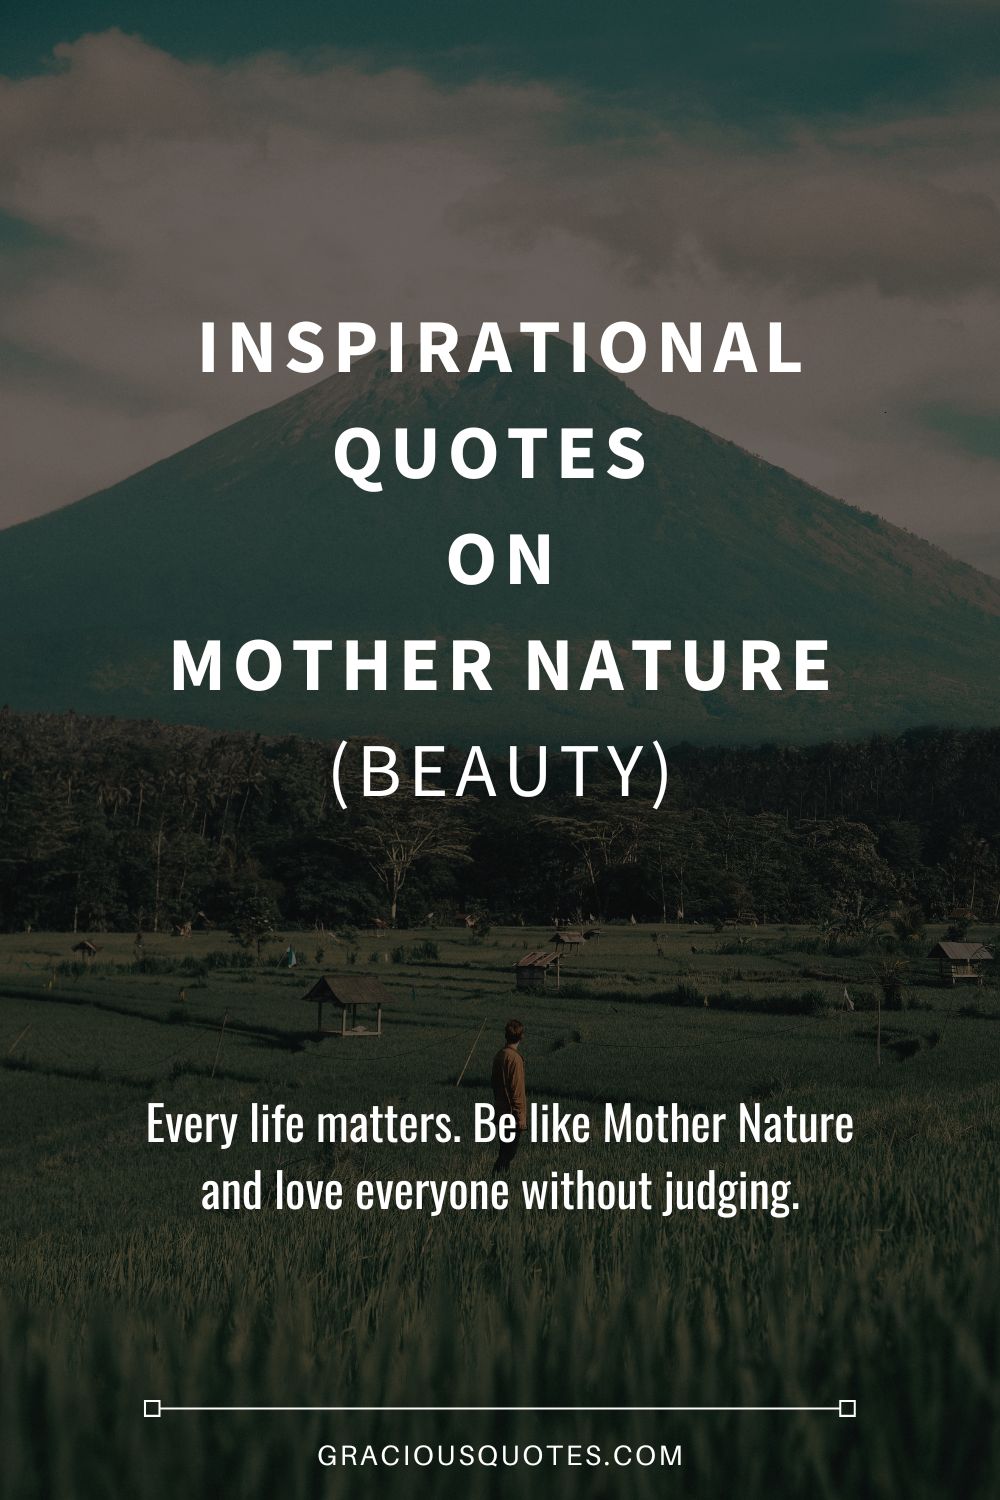 Inspirational Quotes on Mother Nature (BEAUTY) - Gracious Quotes